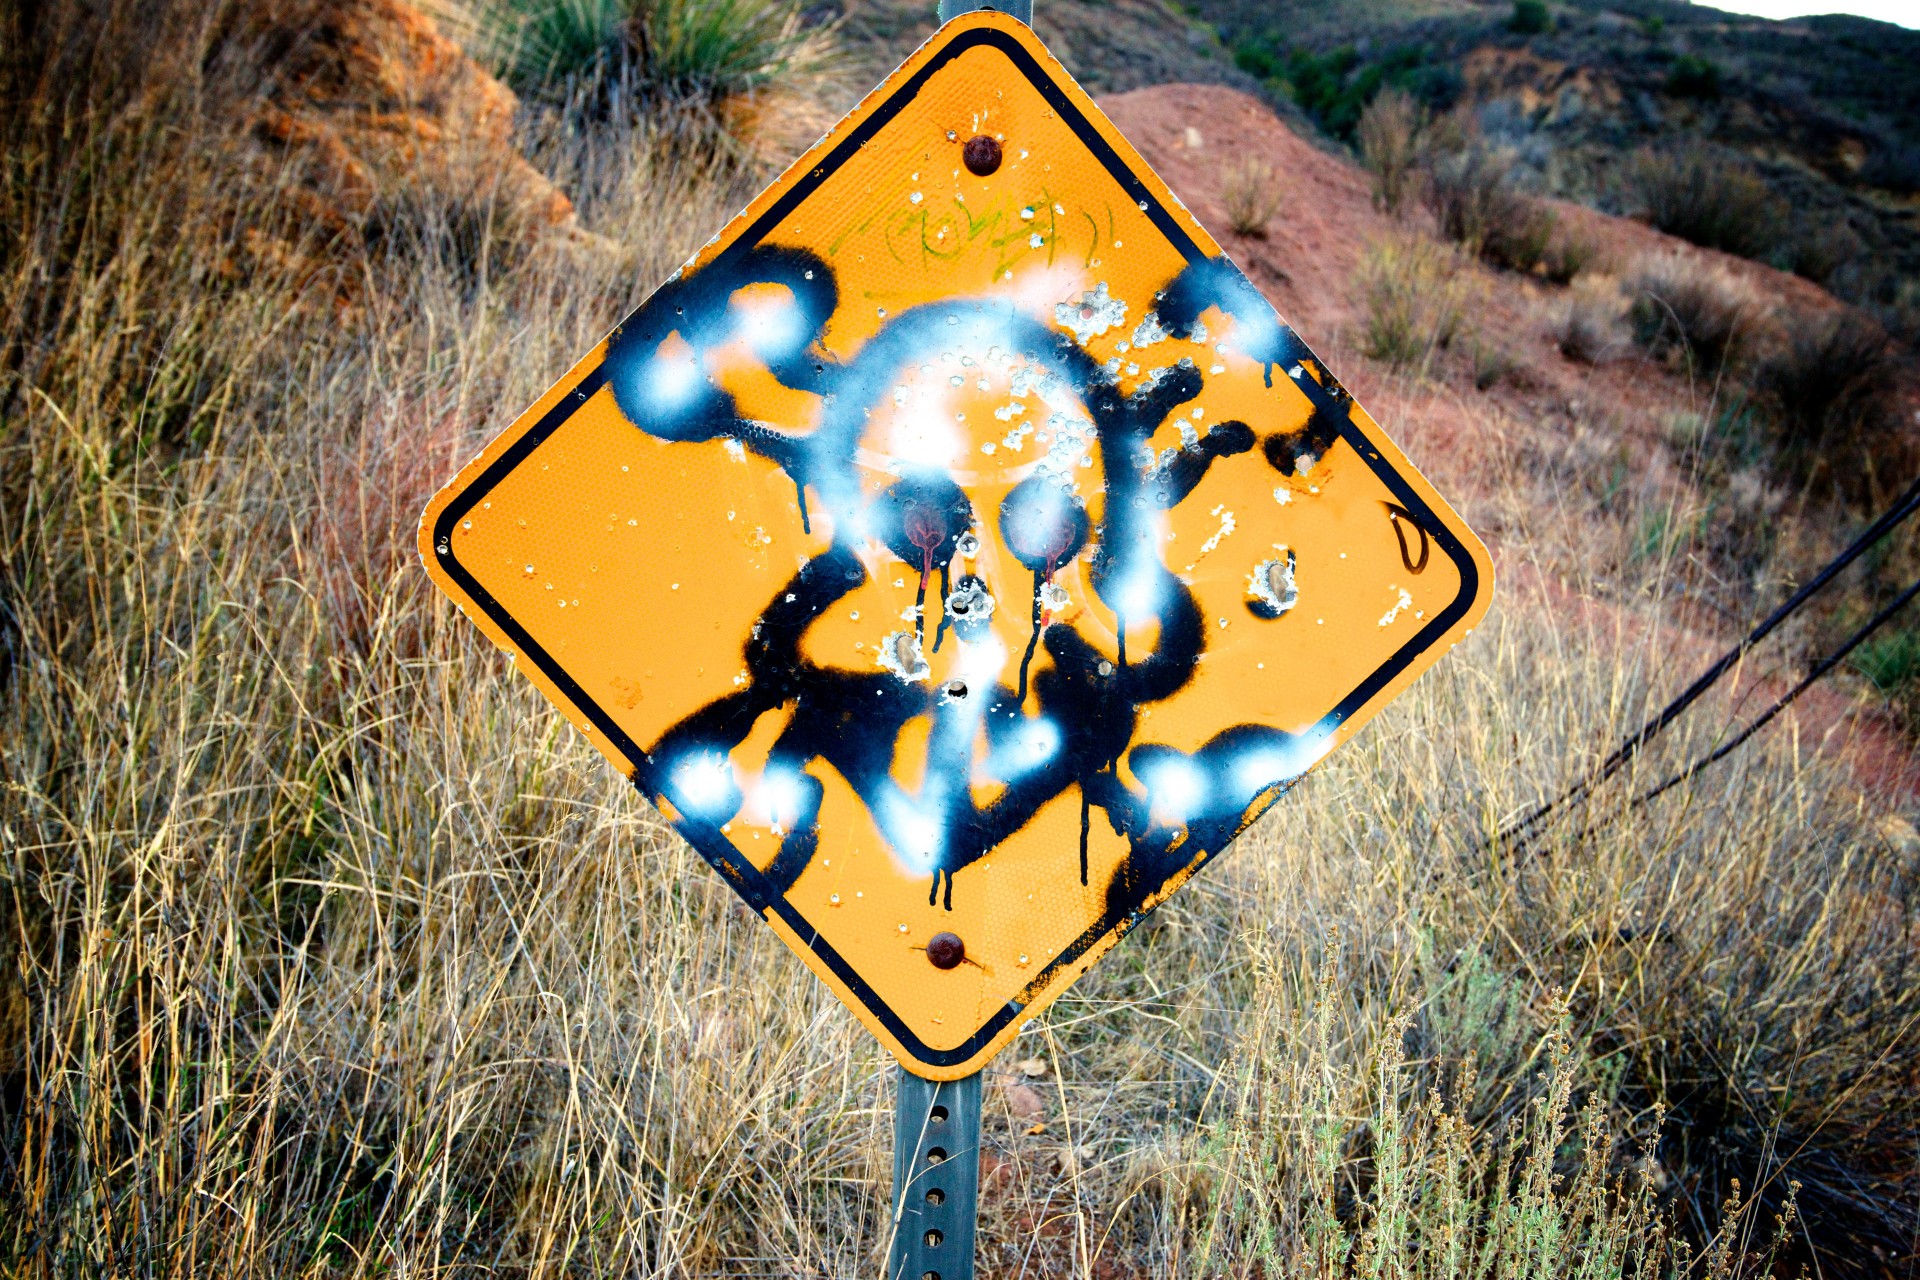 Skull and Crossbones graffiti marks a road sign long abandoned in the wilderness of California.